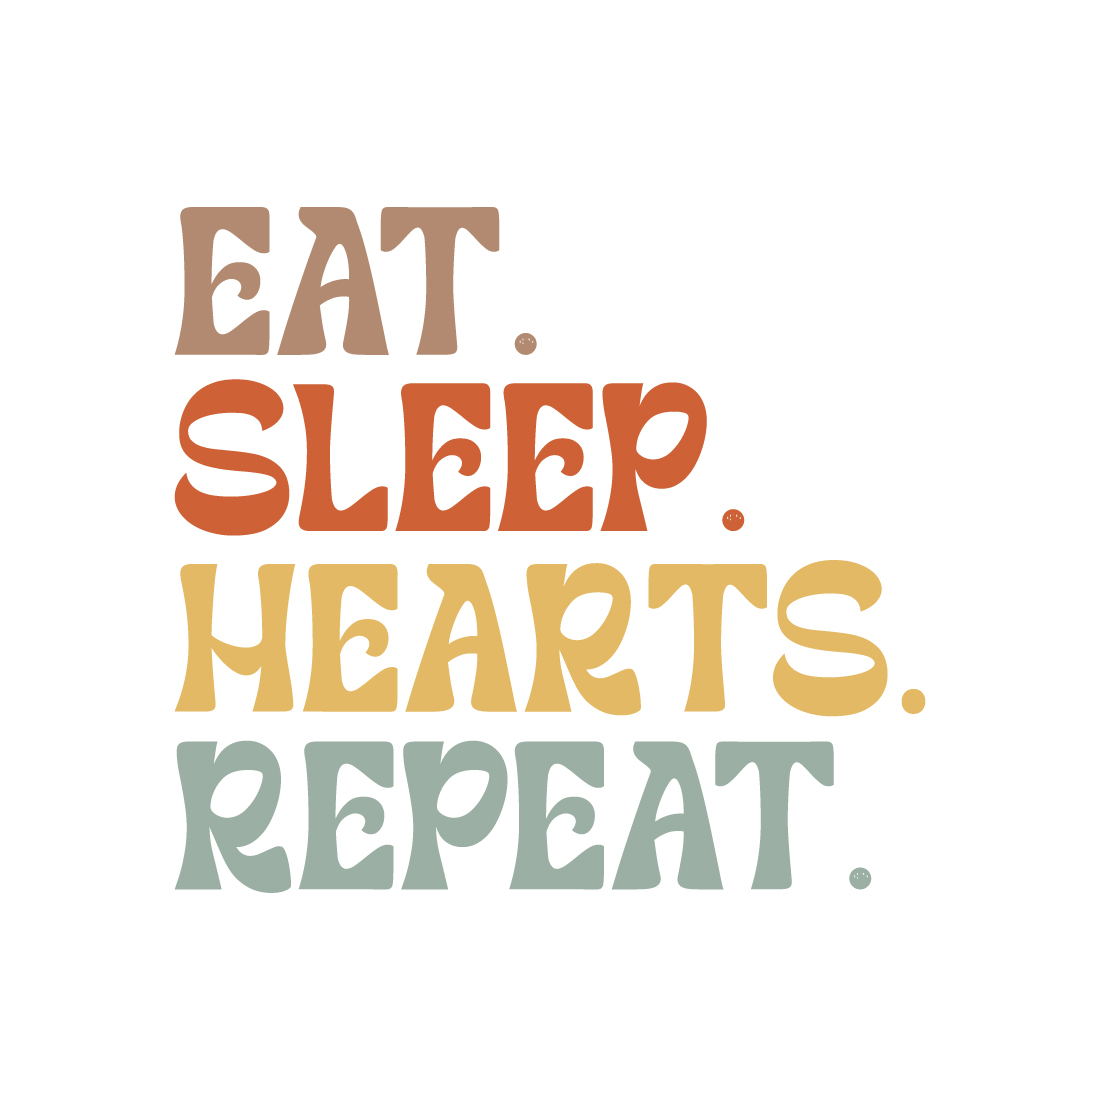 Eat Sleep Hearts Repeat indoor game typography design for t-shirts, cards, frame artwork, phone cases, bags, mugs, stickers, tumblers, print, etc cover image.